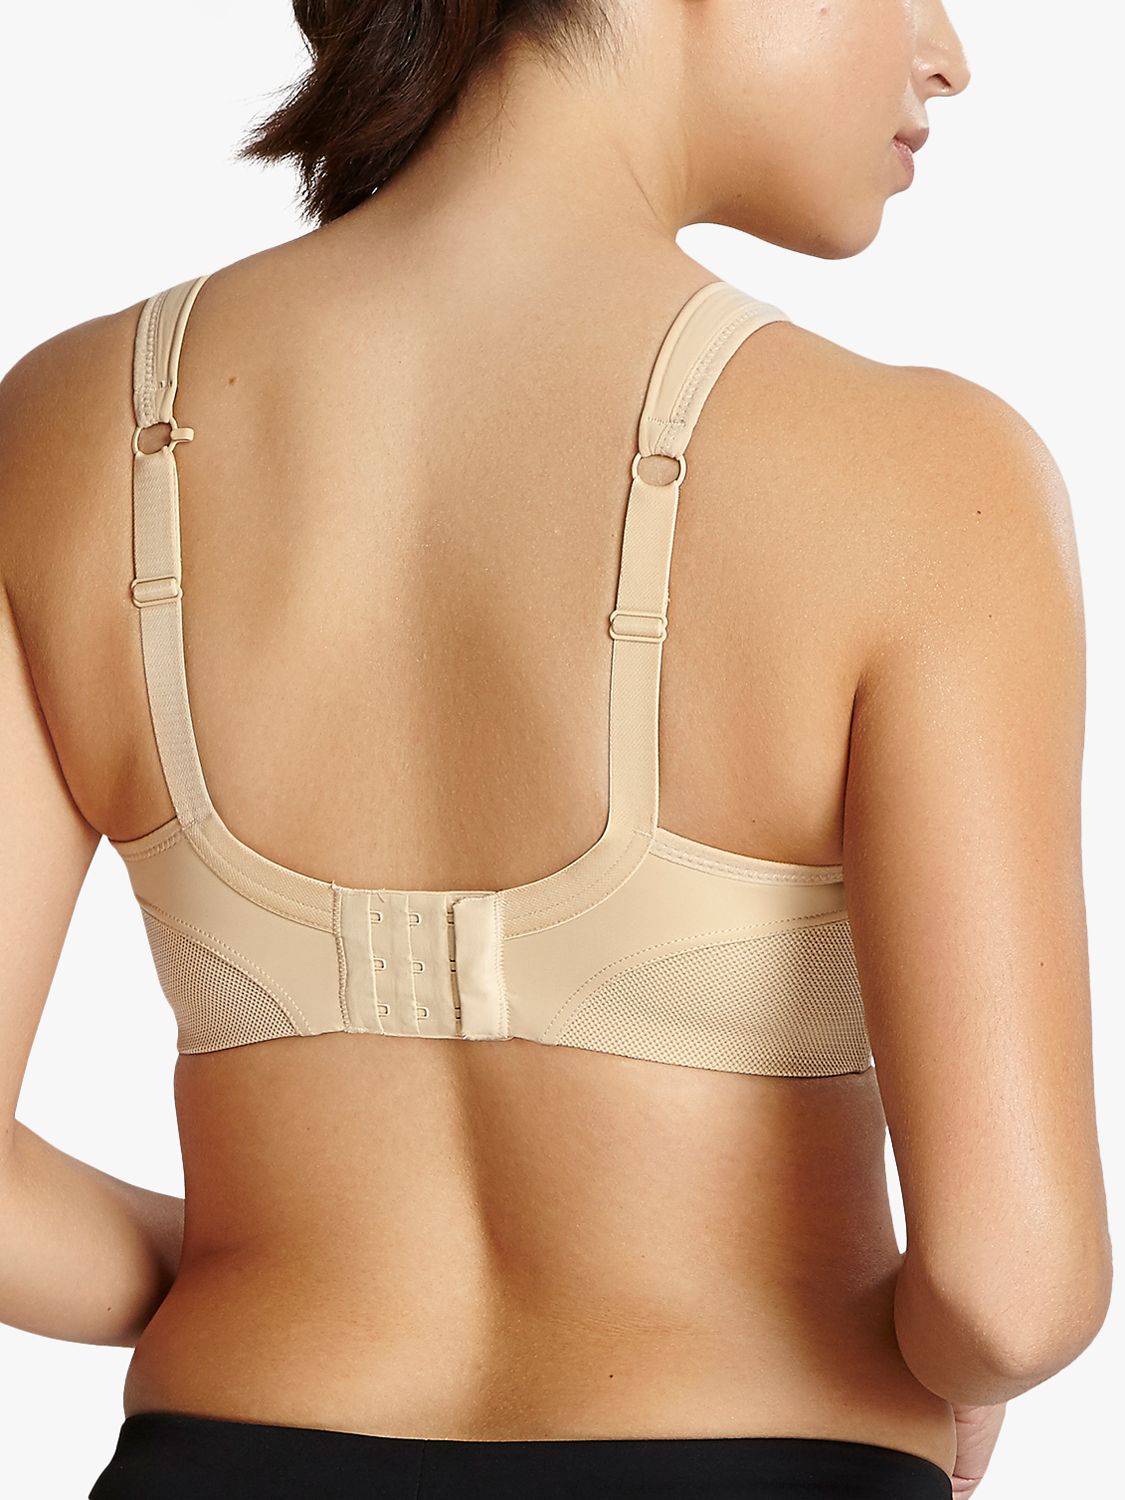 The 6 Must Have Bras to Save You Time - Page 5 of 17 - Panache Lingerie